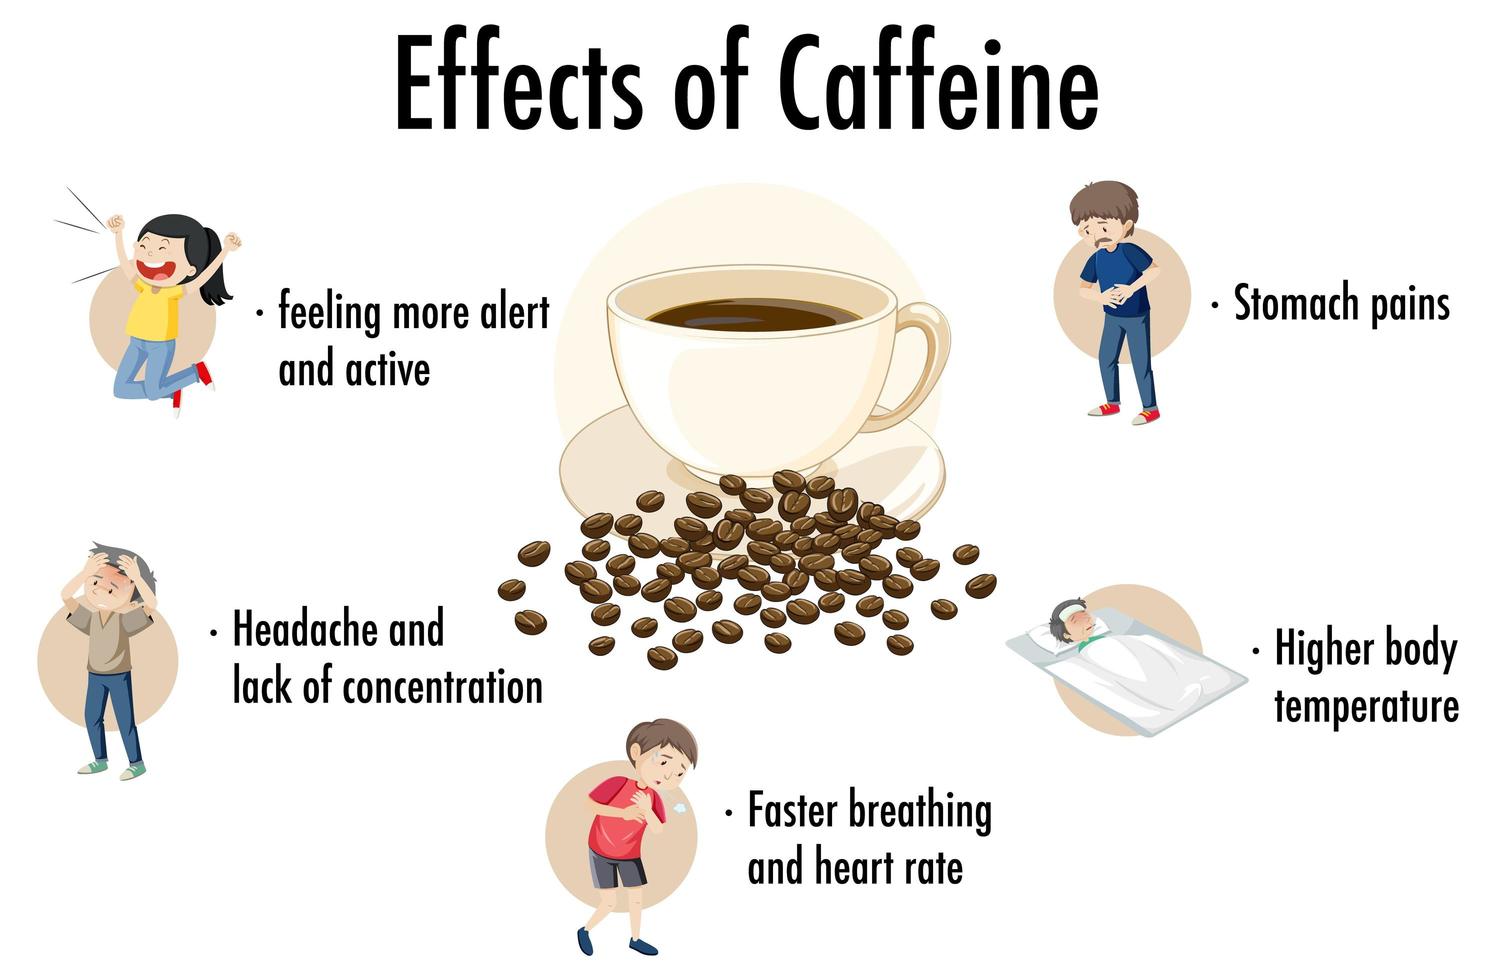 What are caffeine's or coffee effects on the body?